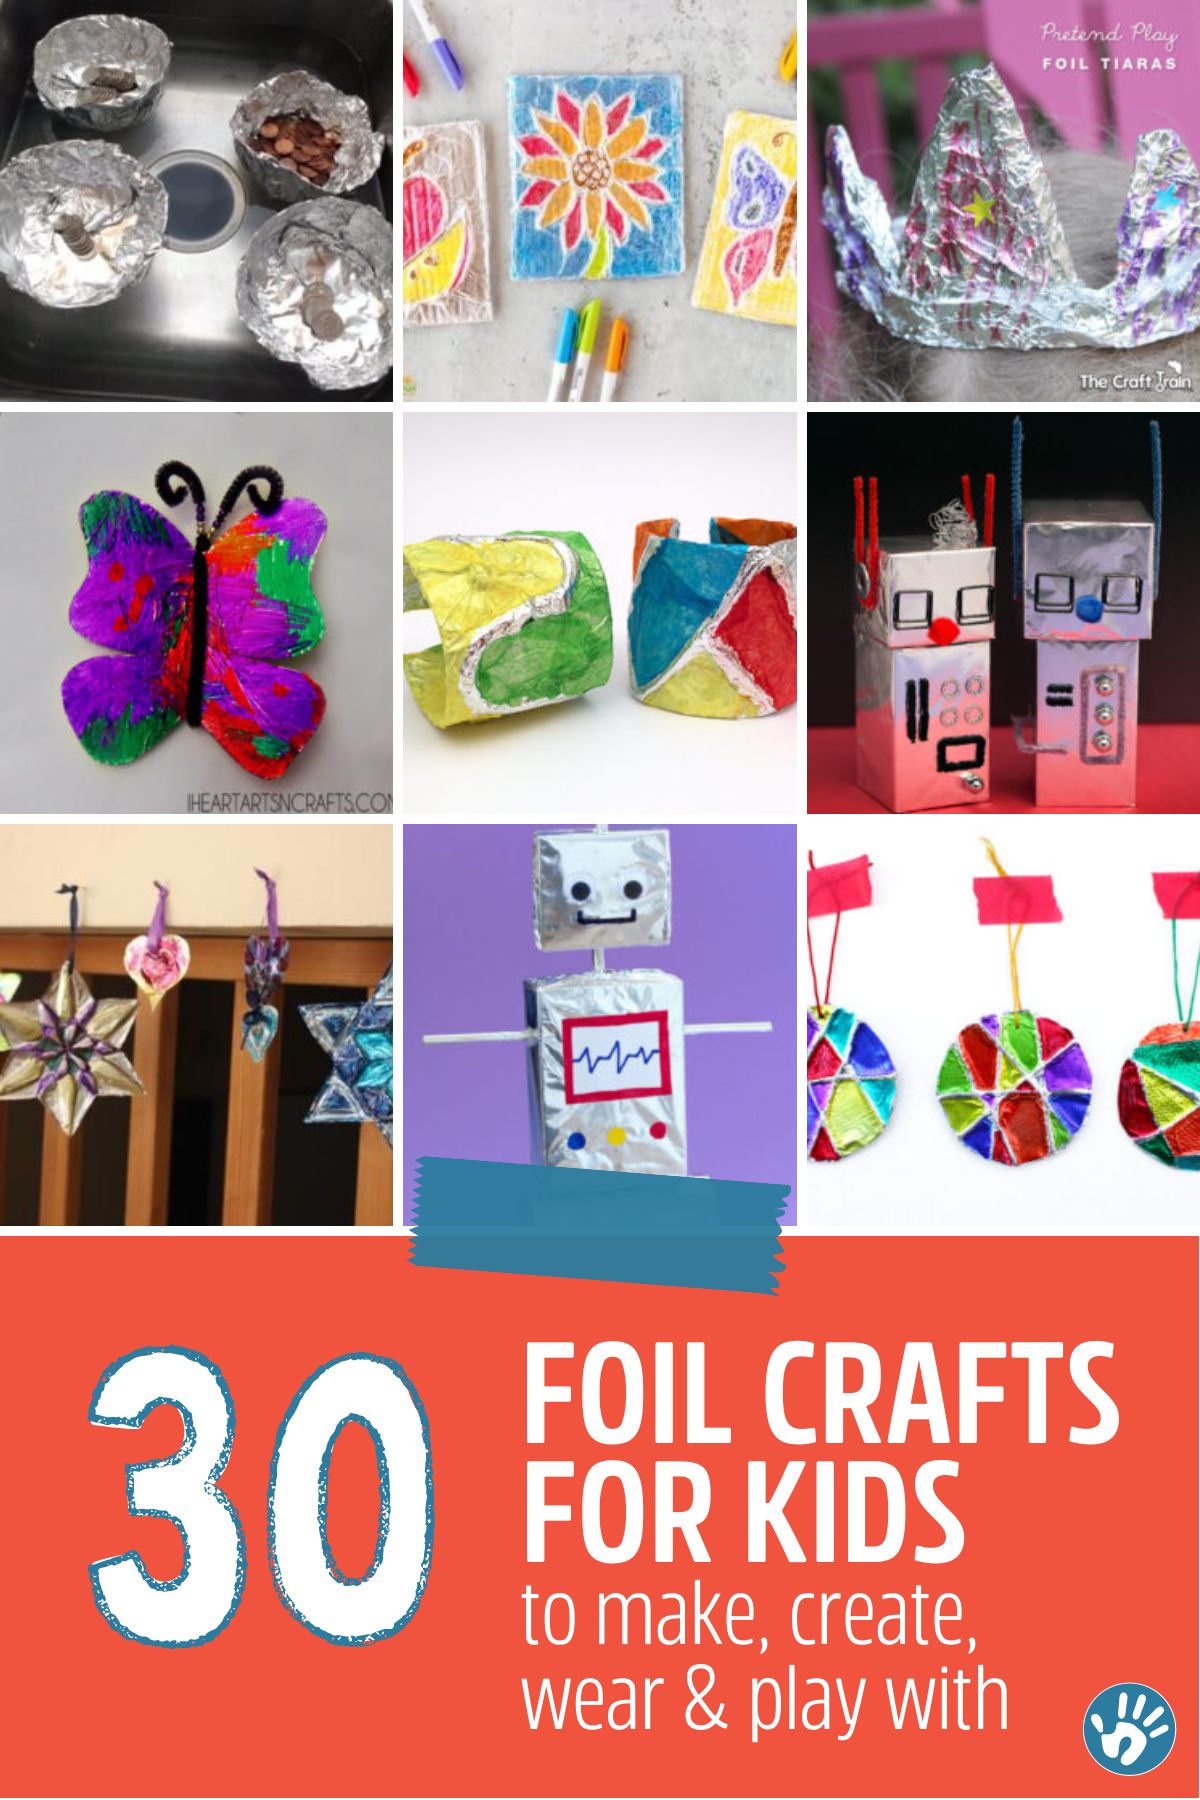 Recycled Craft Ideas Using Disposable Cookie Sheets!